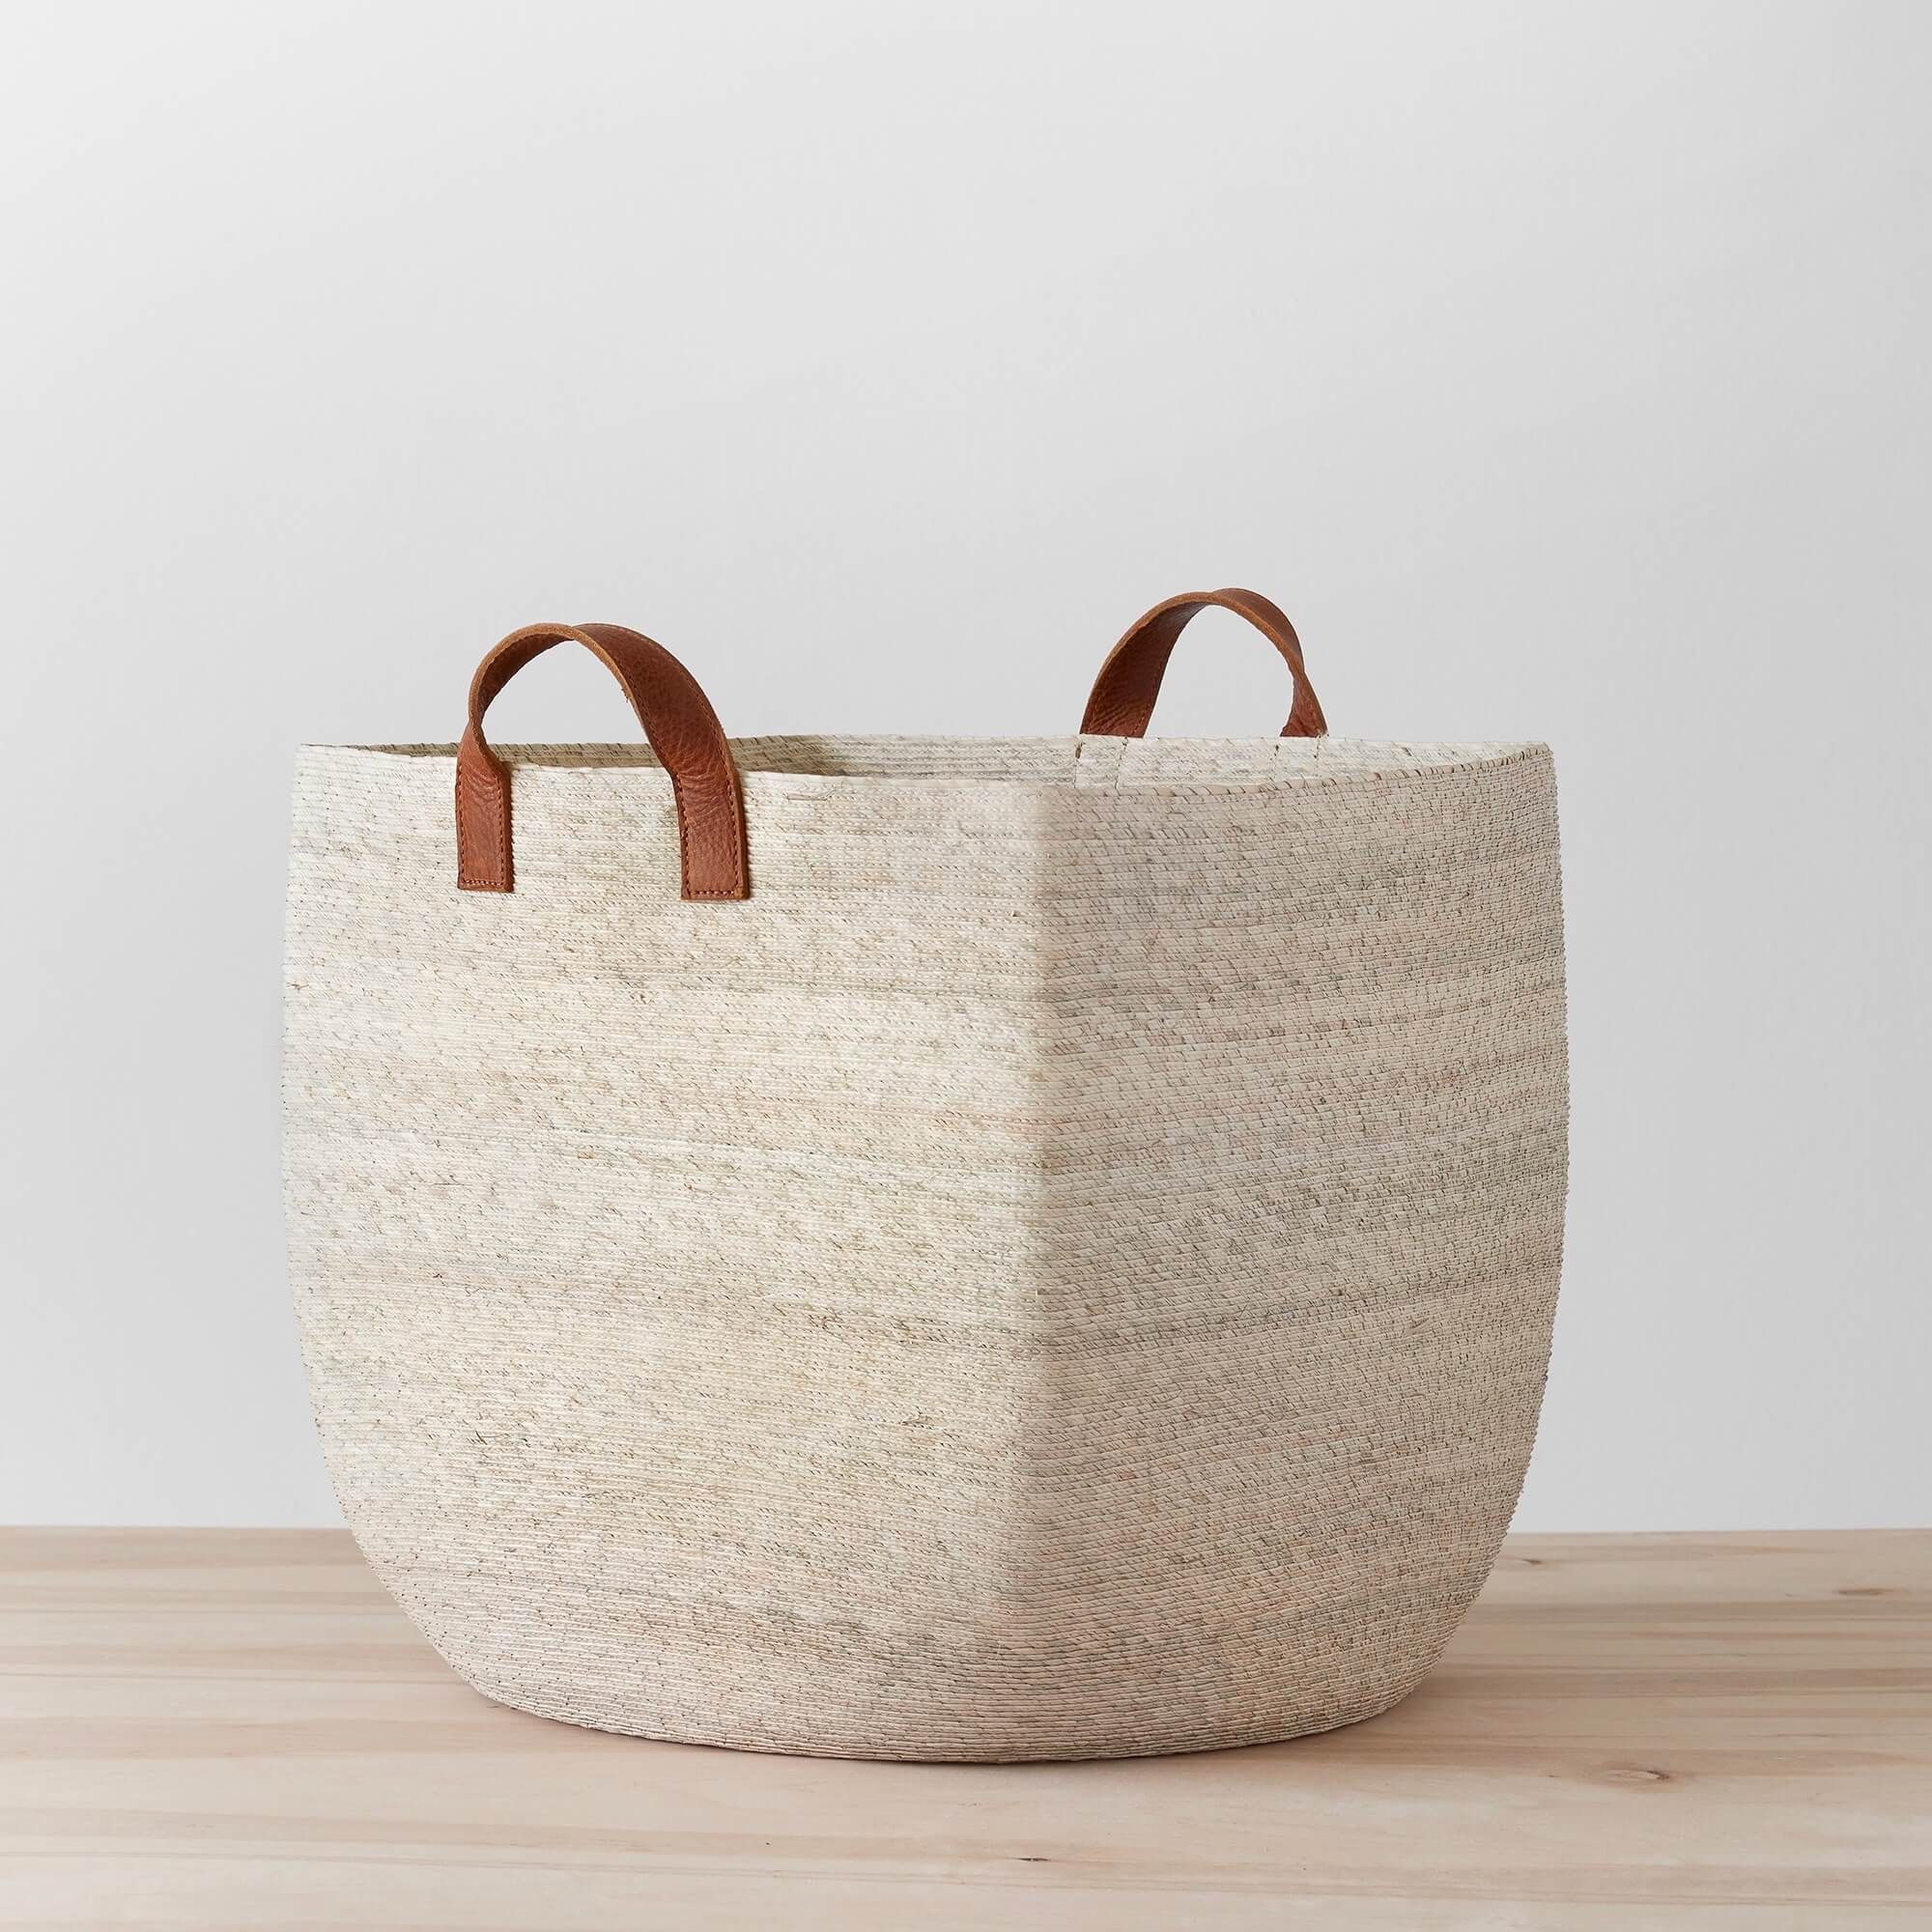 Woven Storage Baskets | Handcrafted with Palm Leaves   – The Citizenry | The Citizenry